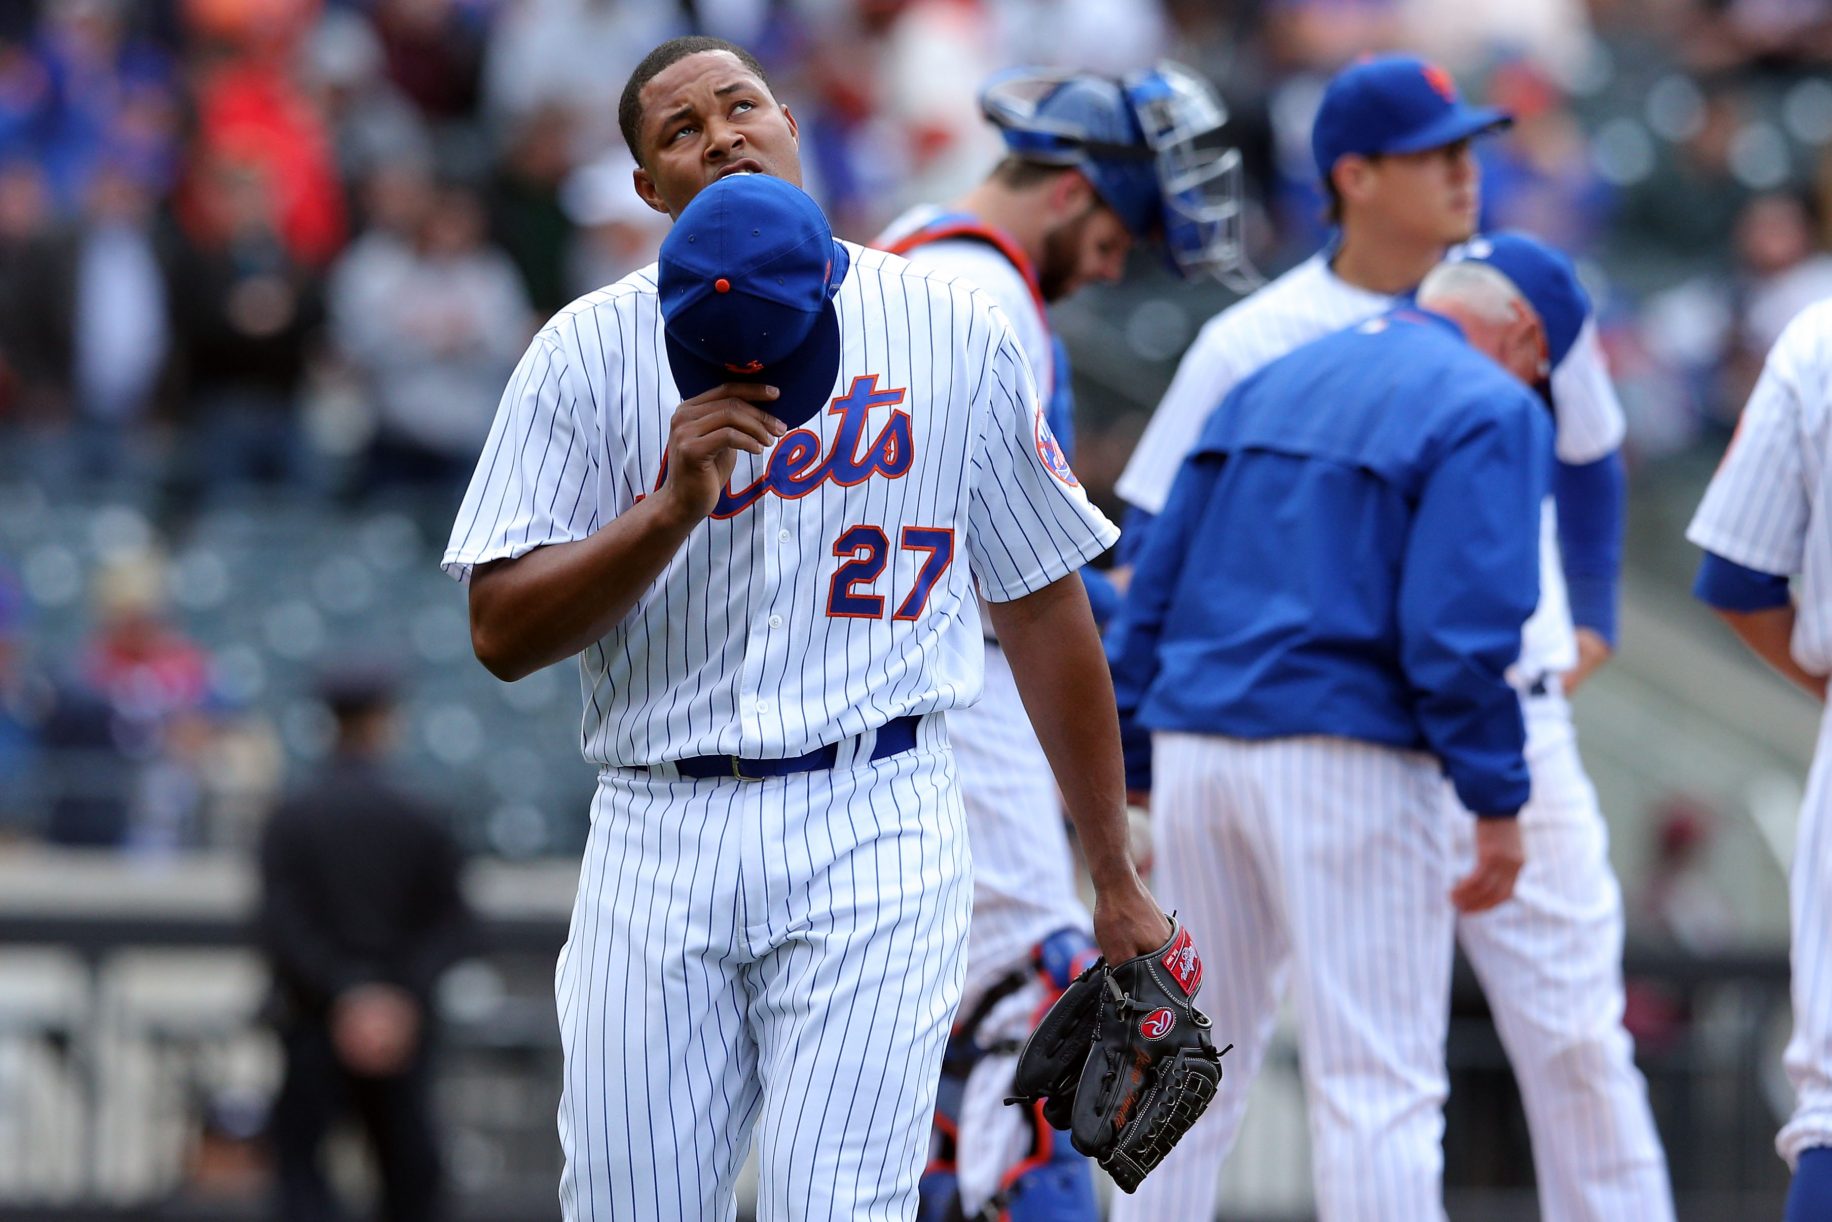 New York Mets: More Bad News as Closer Jeurys Familia Diagnosed With Blot Clot 